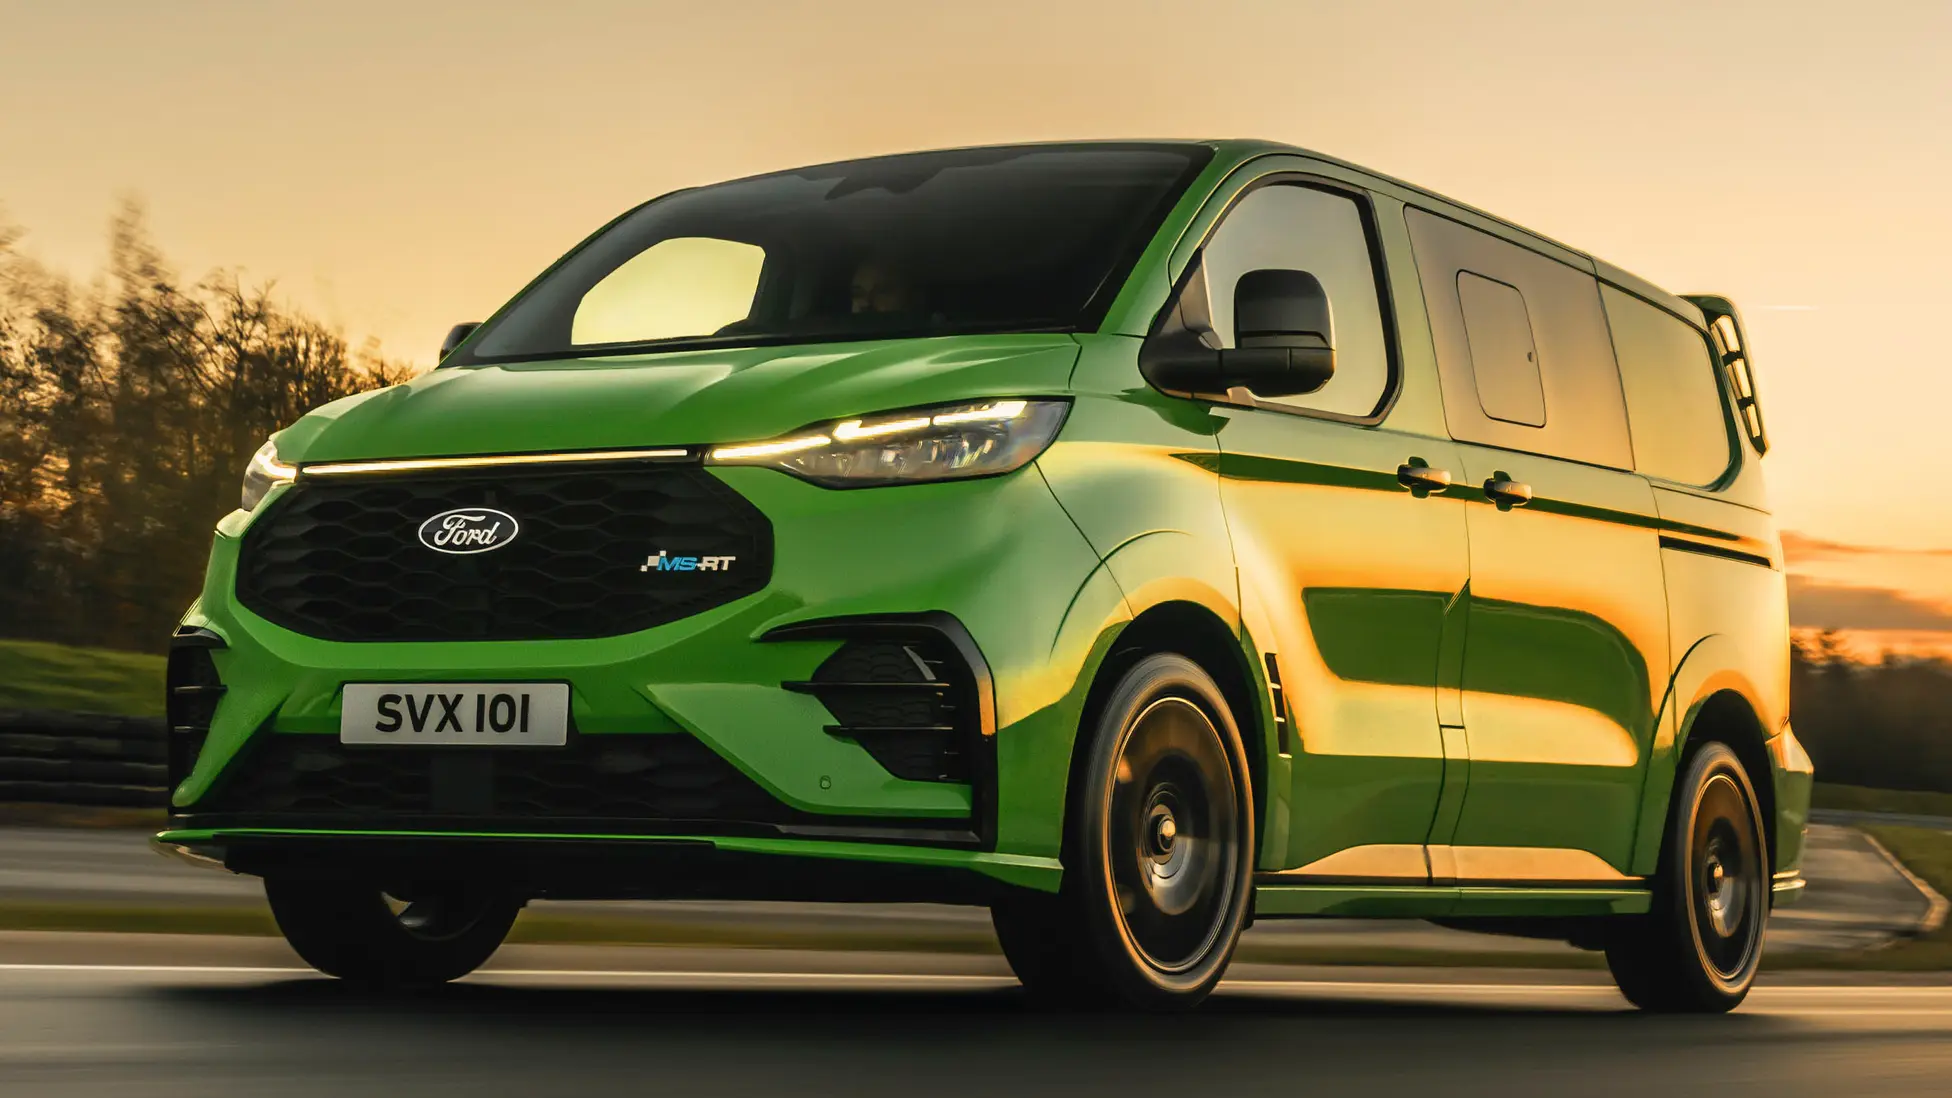 like the ranger ms-rt but want more space? check out ford's bodykitted transit